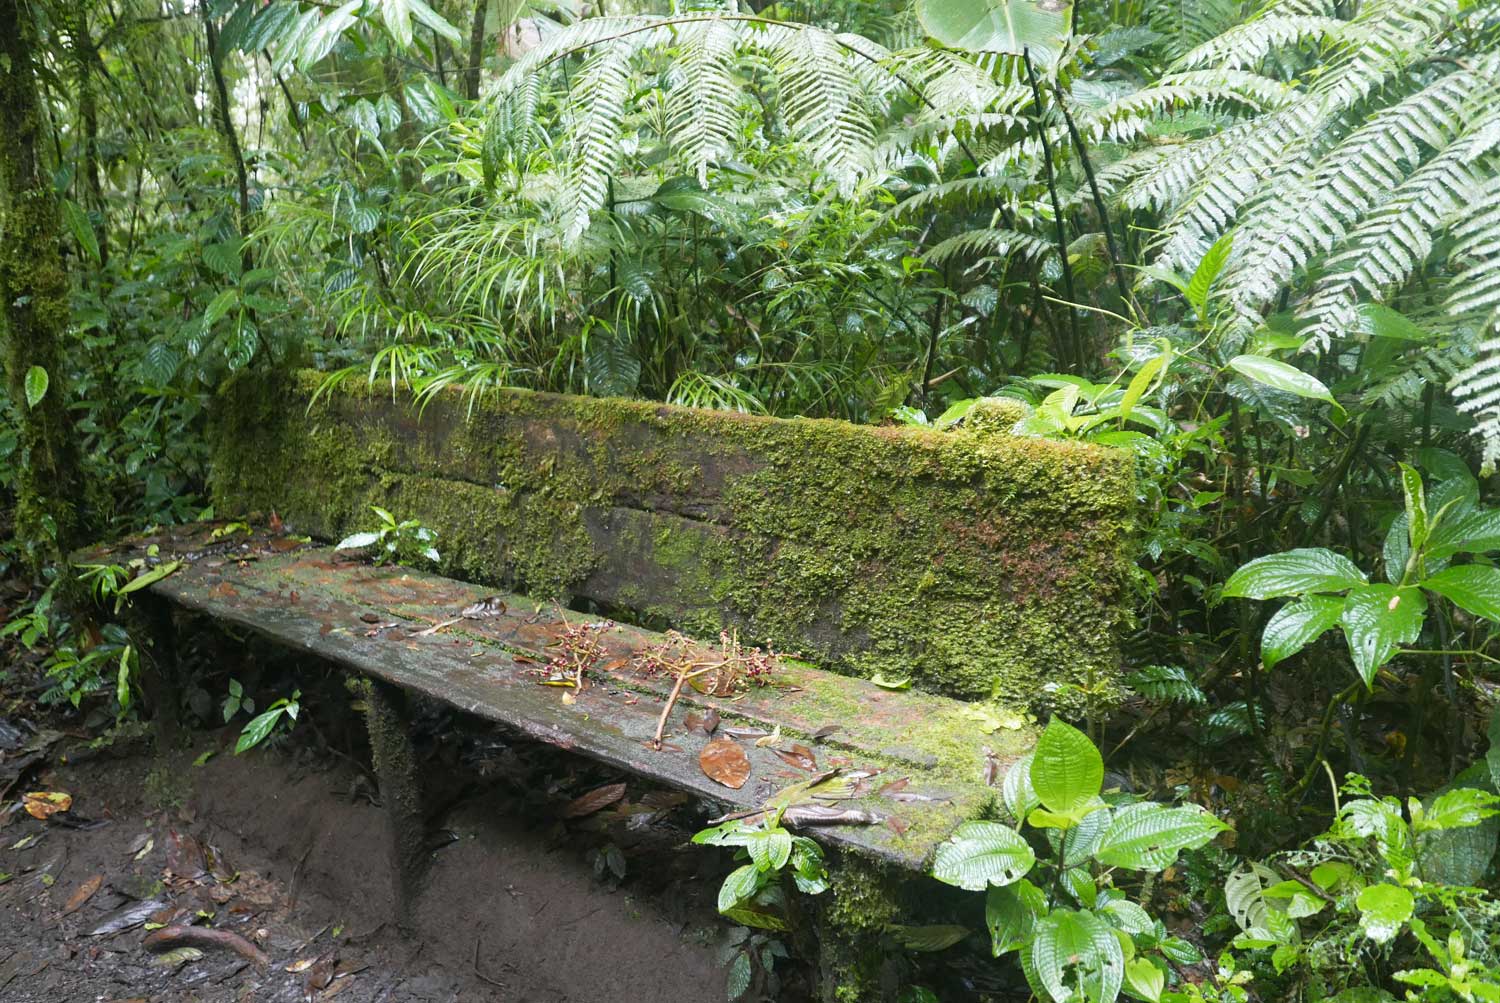 One of the few benches to rest in Santa Elena cloud forest